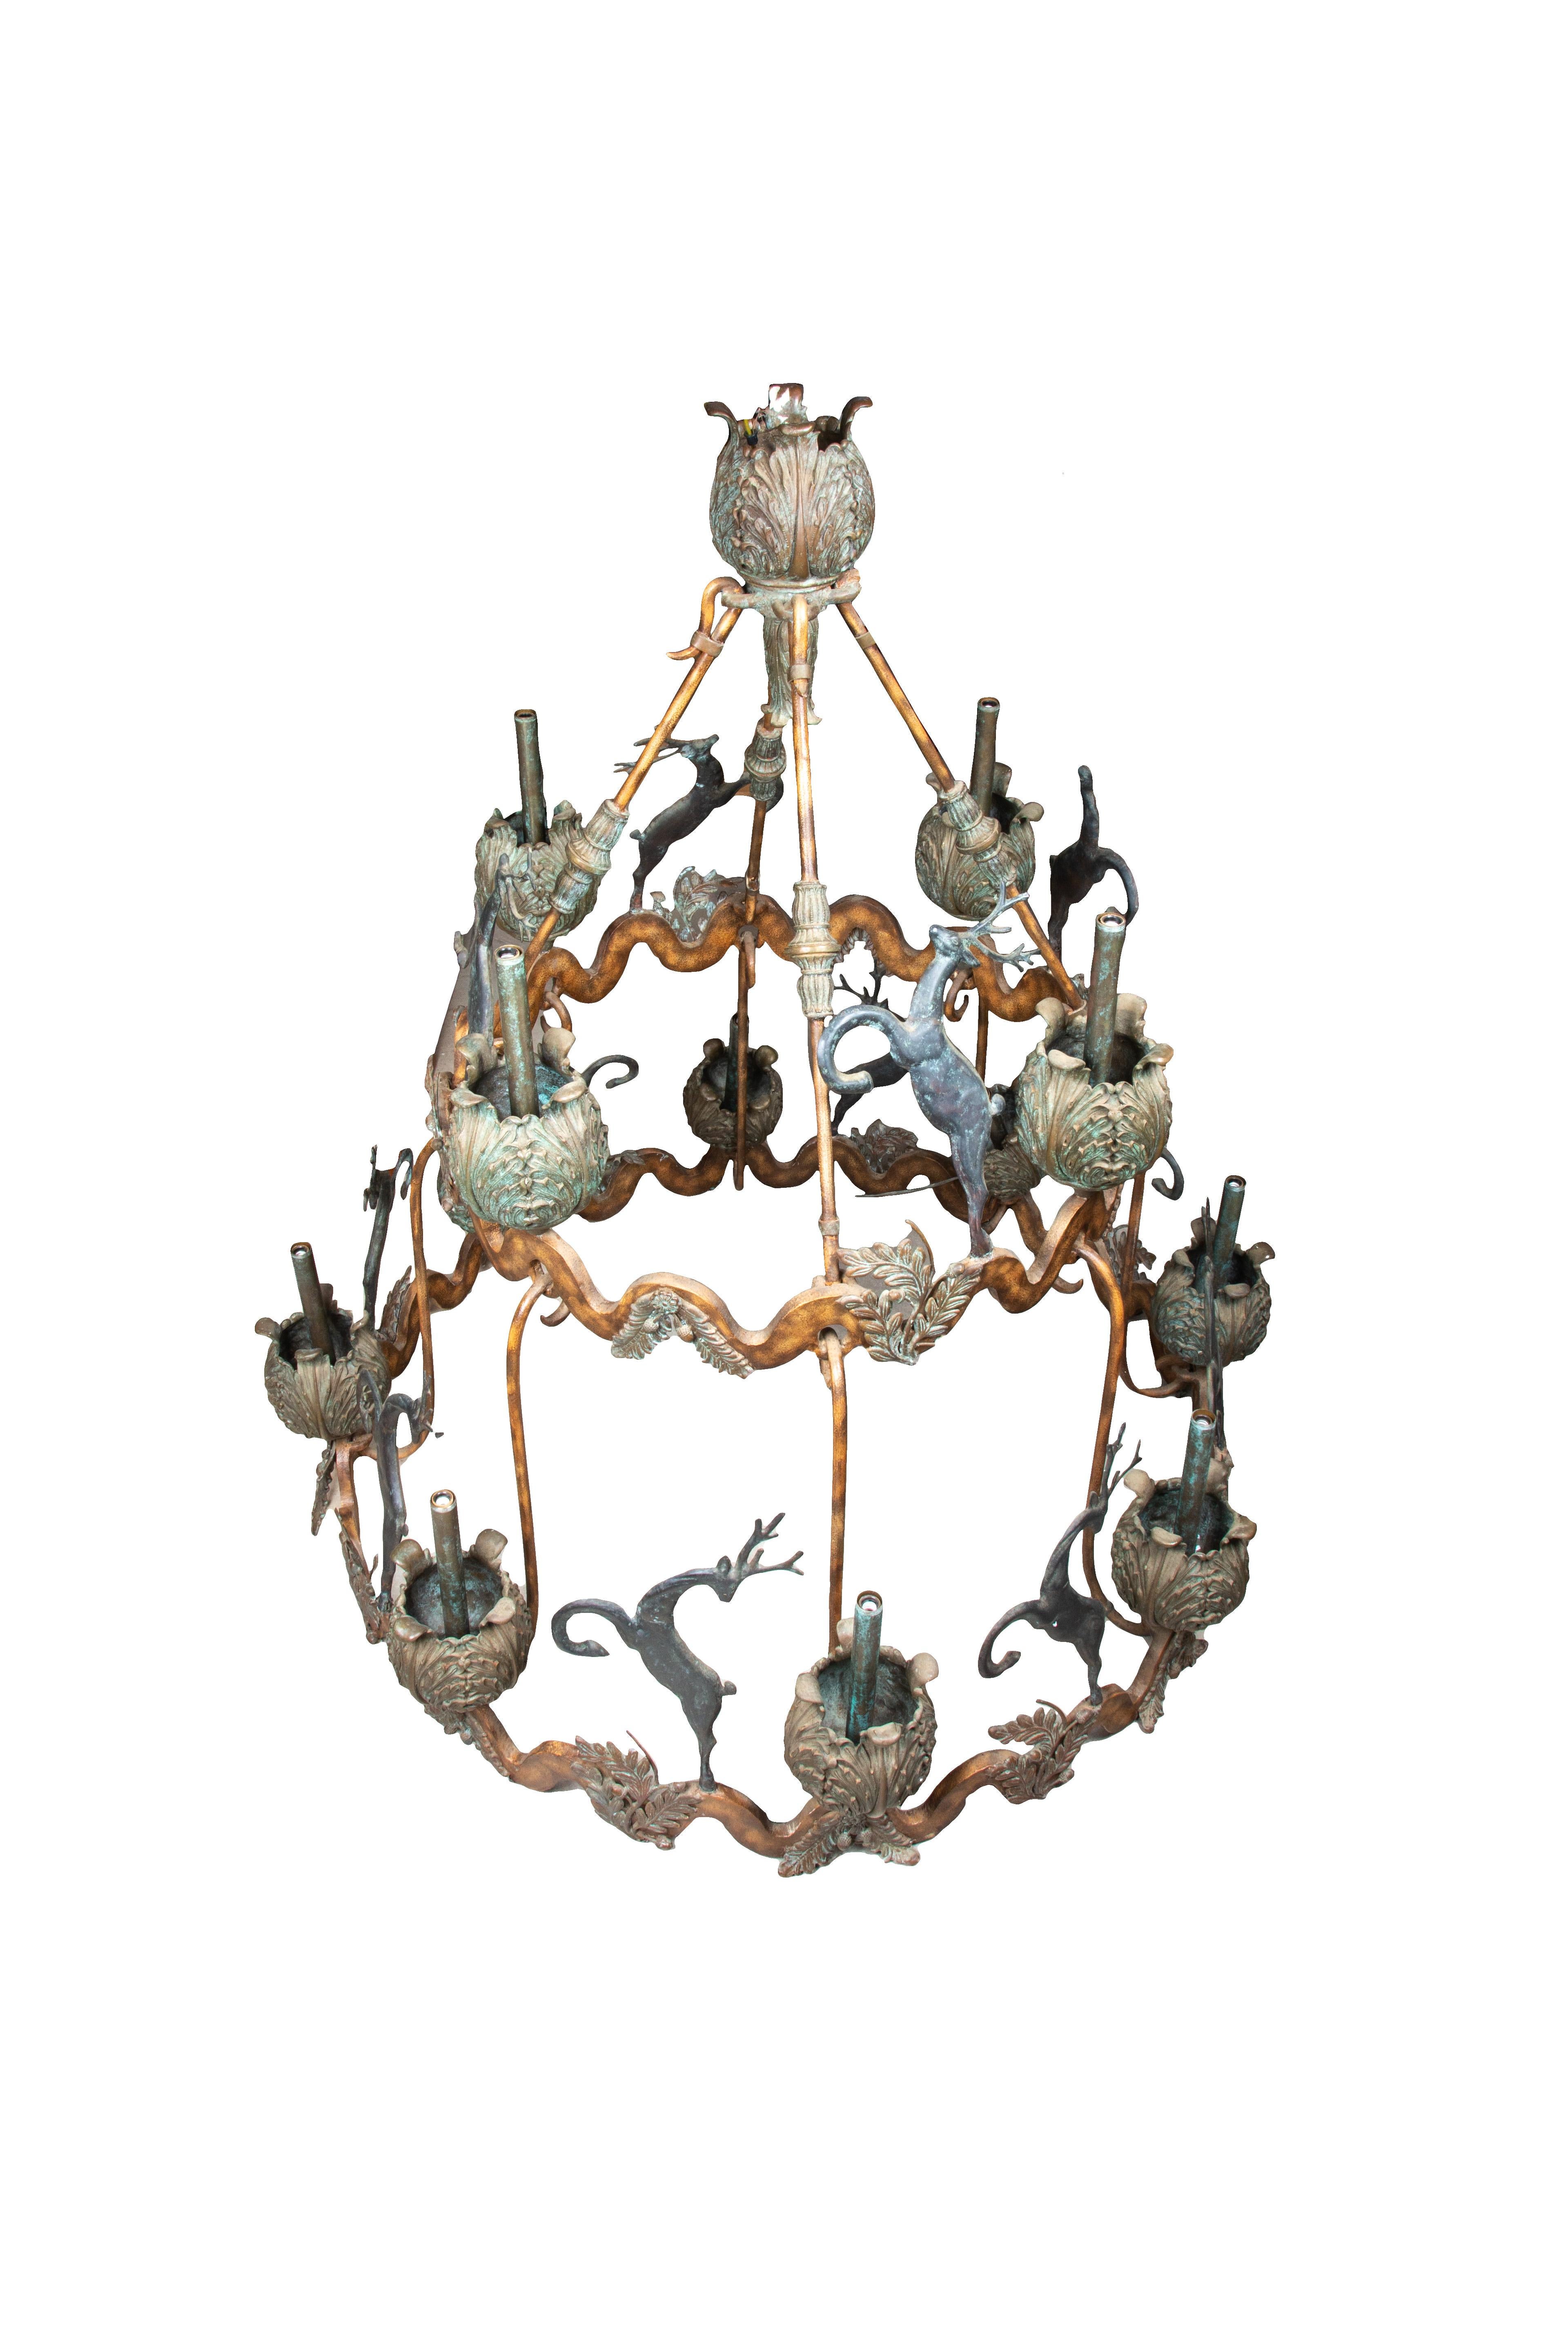 German Massive Iron and Bronze Chandelier Detailed with Leaping Stags and Fauna